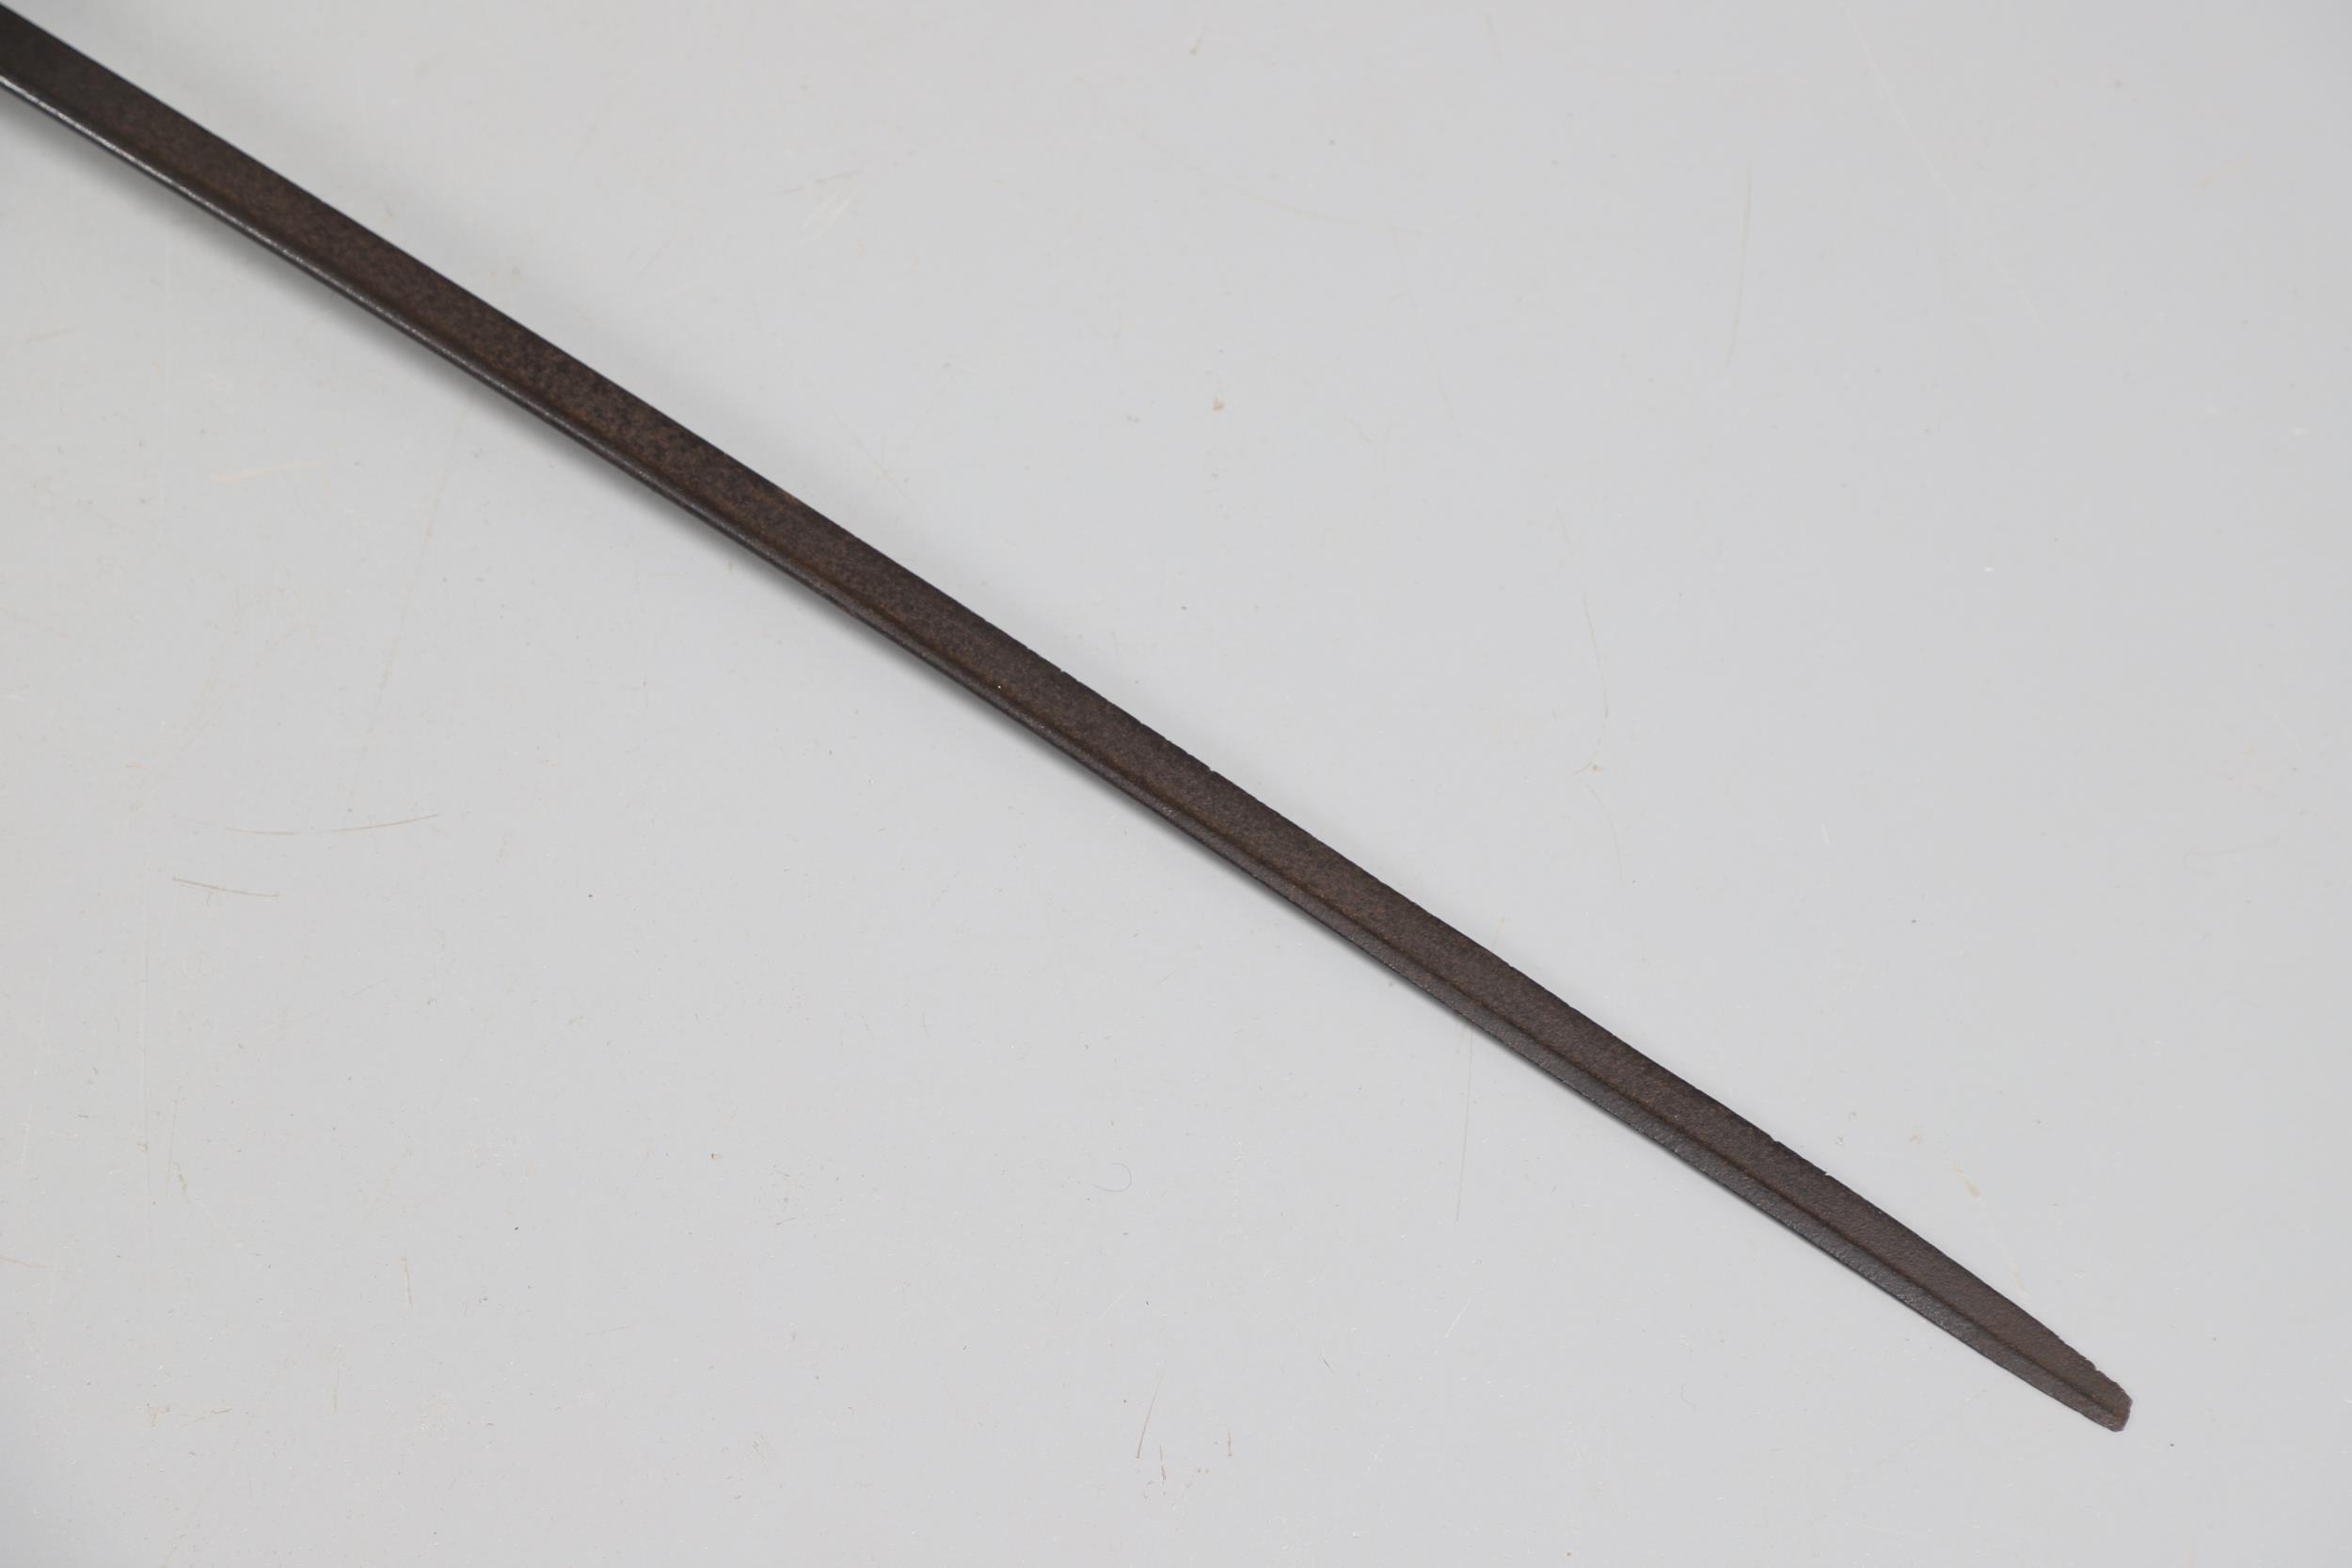 AN EAST INDIA COMPANY OFFICER'S 1822 PATTERN SWORD. - Image 9 of 10